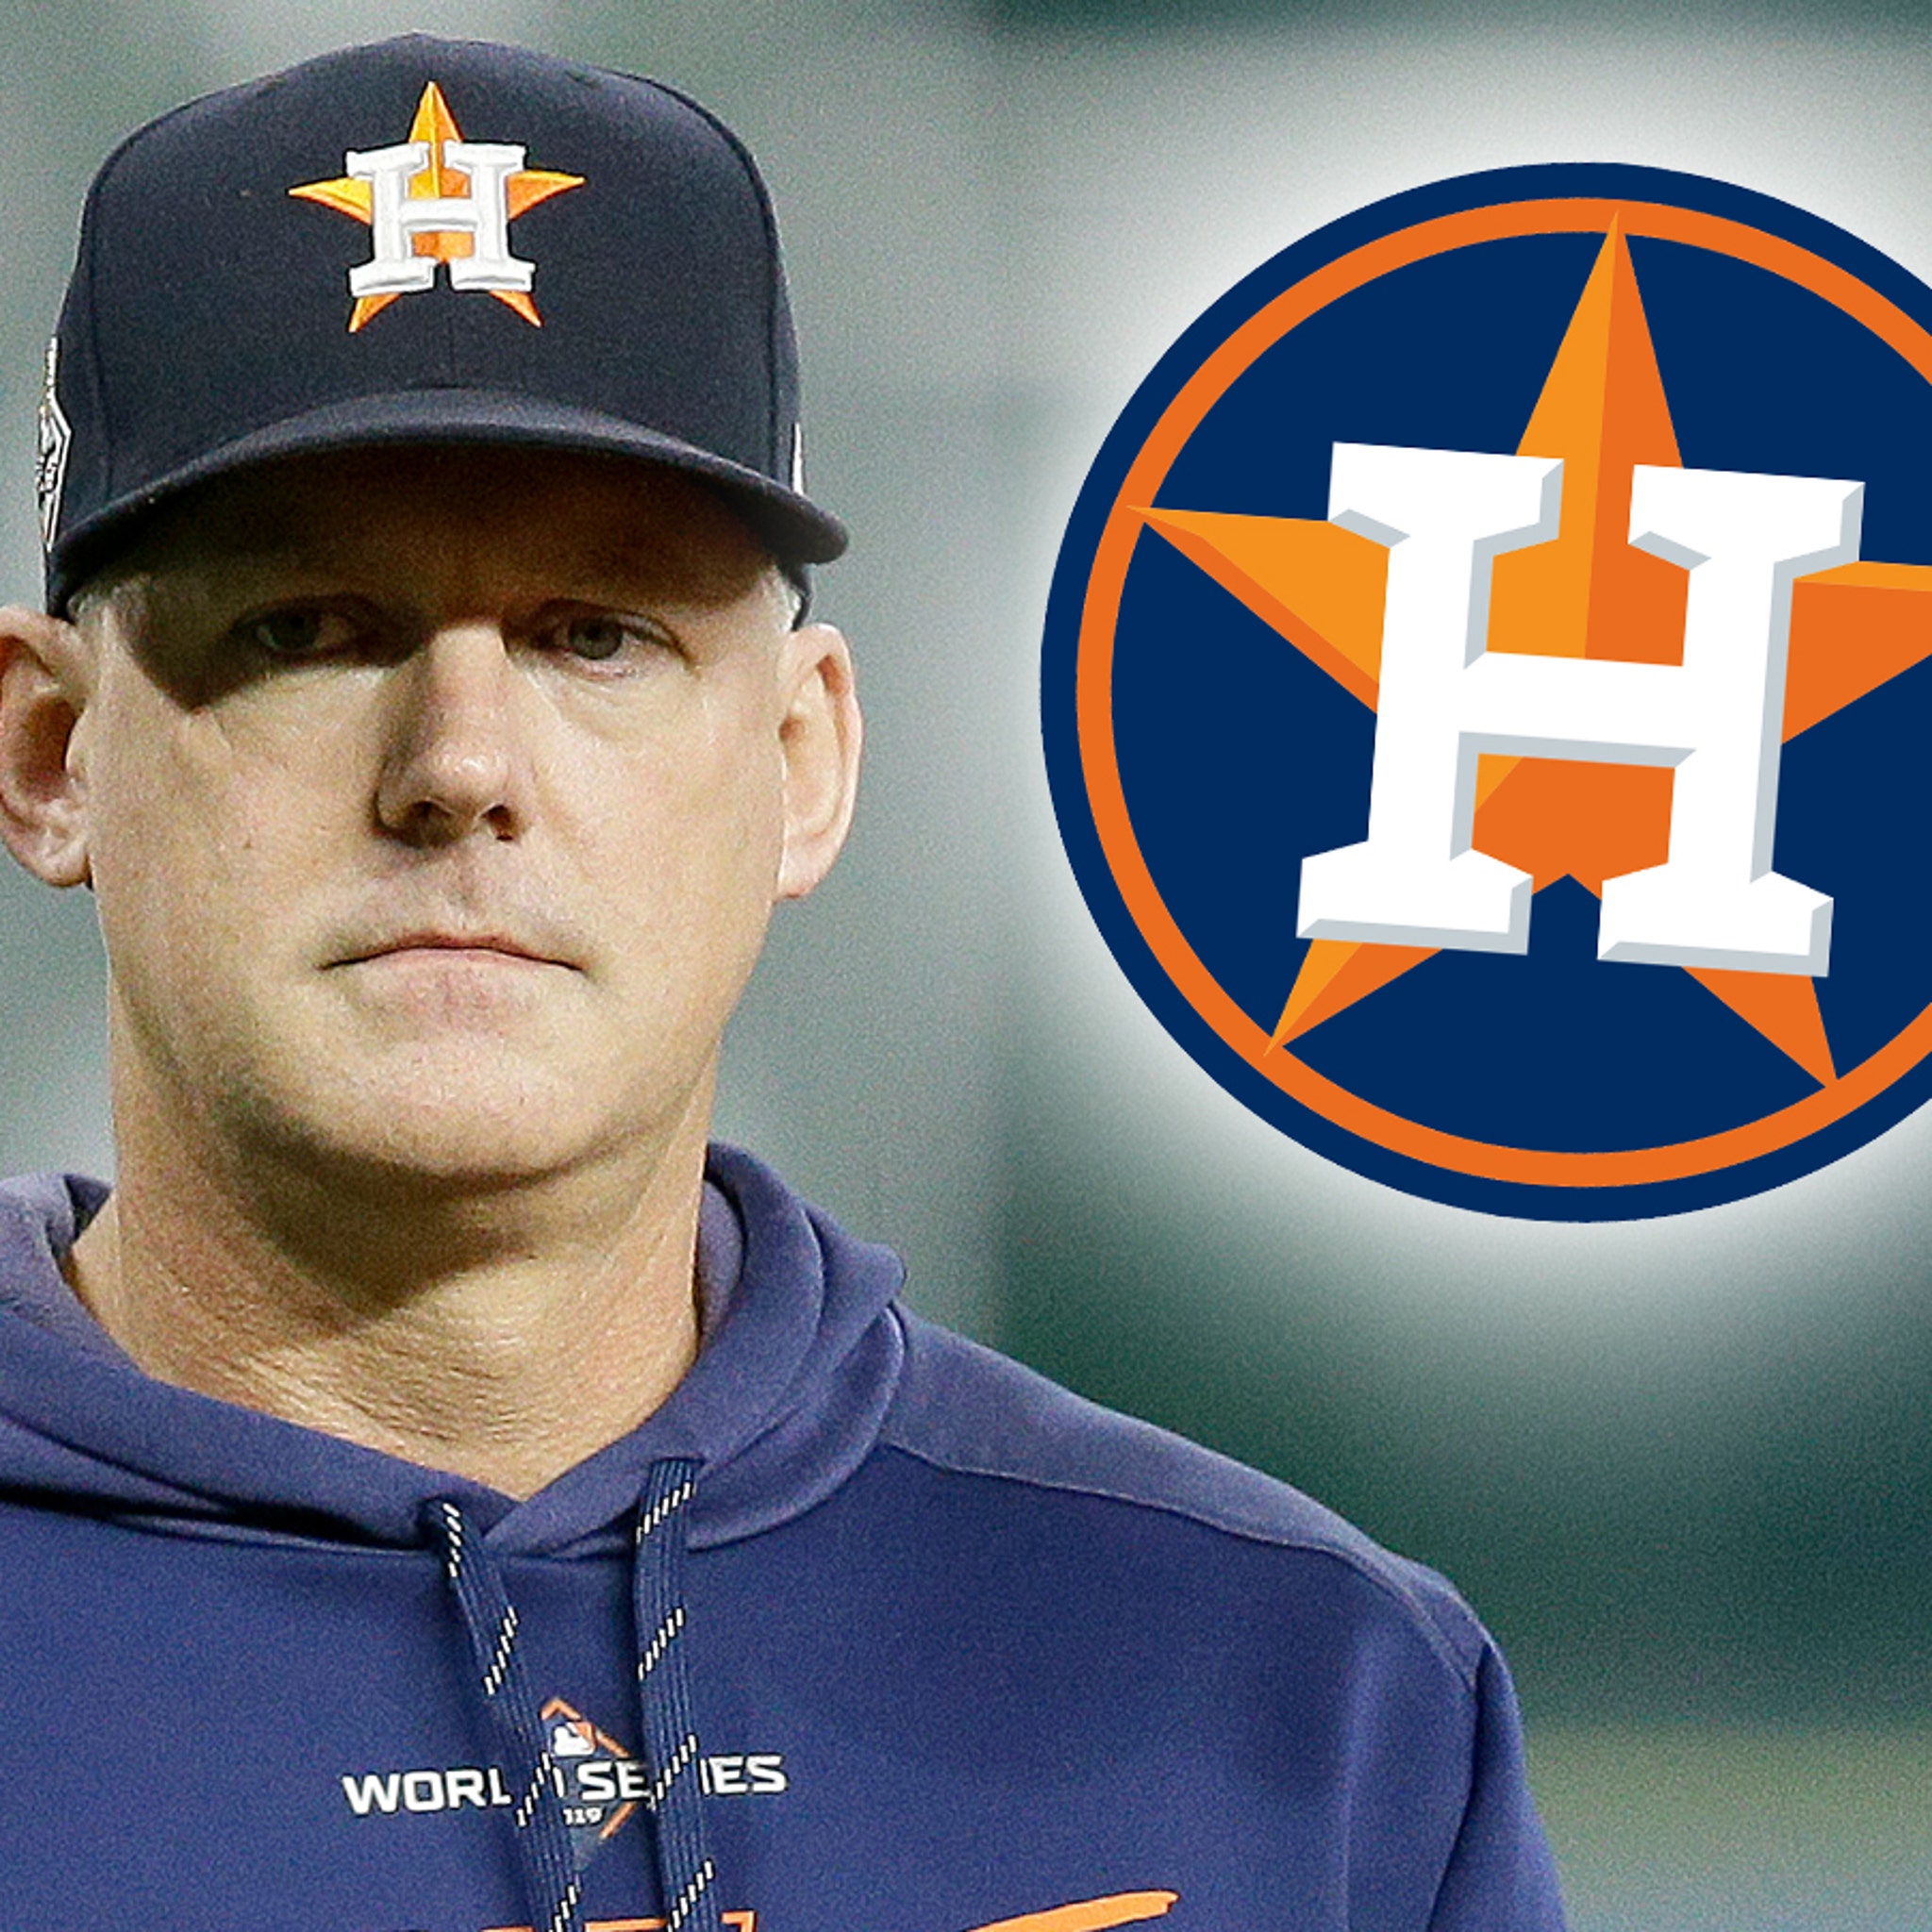 Astros' AJ Hinch, Jeff Luhnow fired after MLB suspension in sign